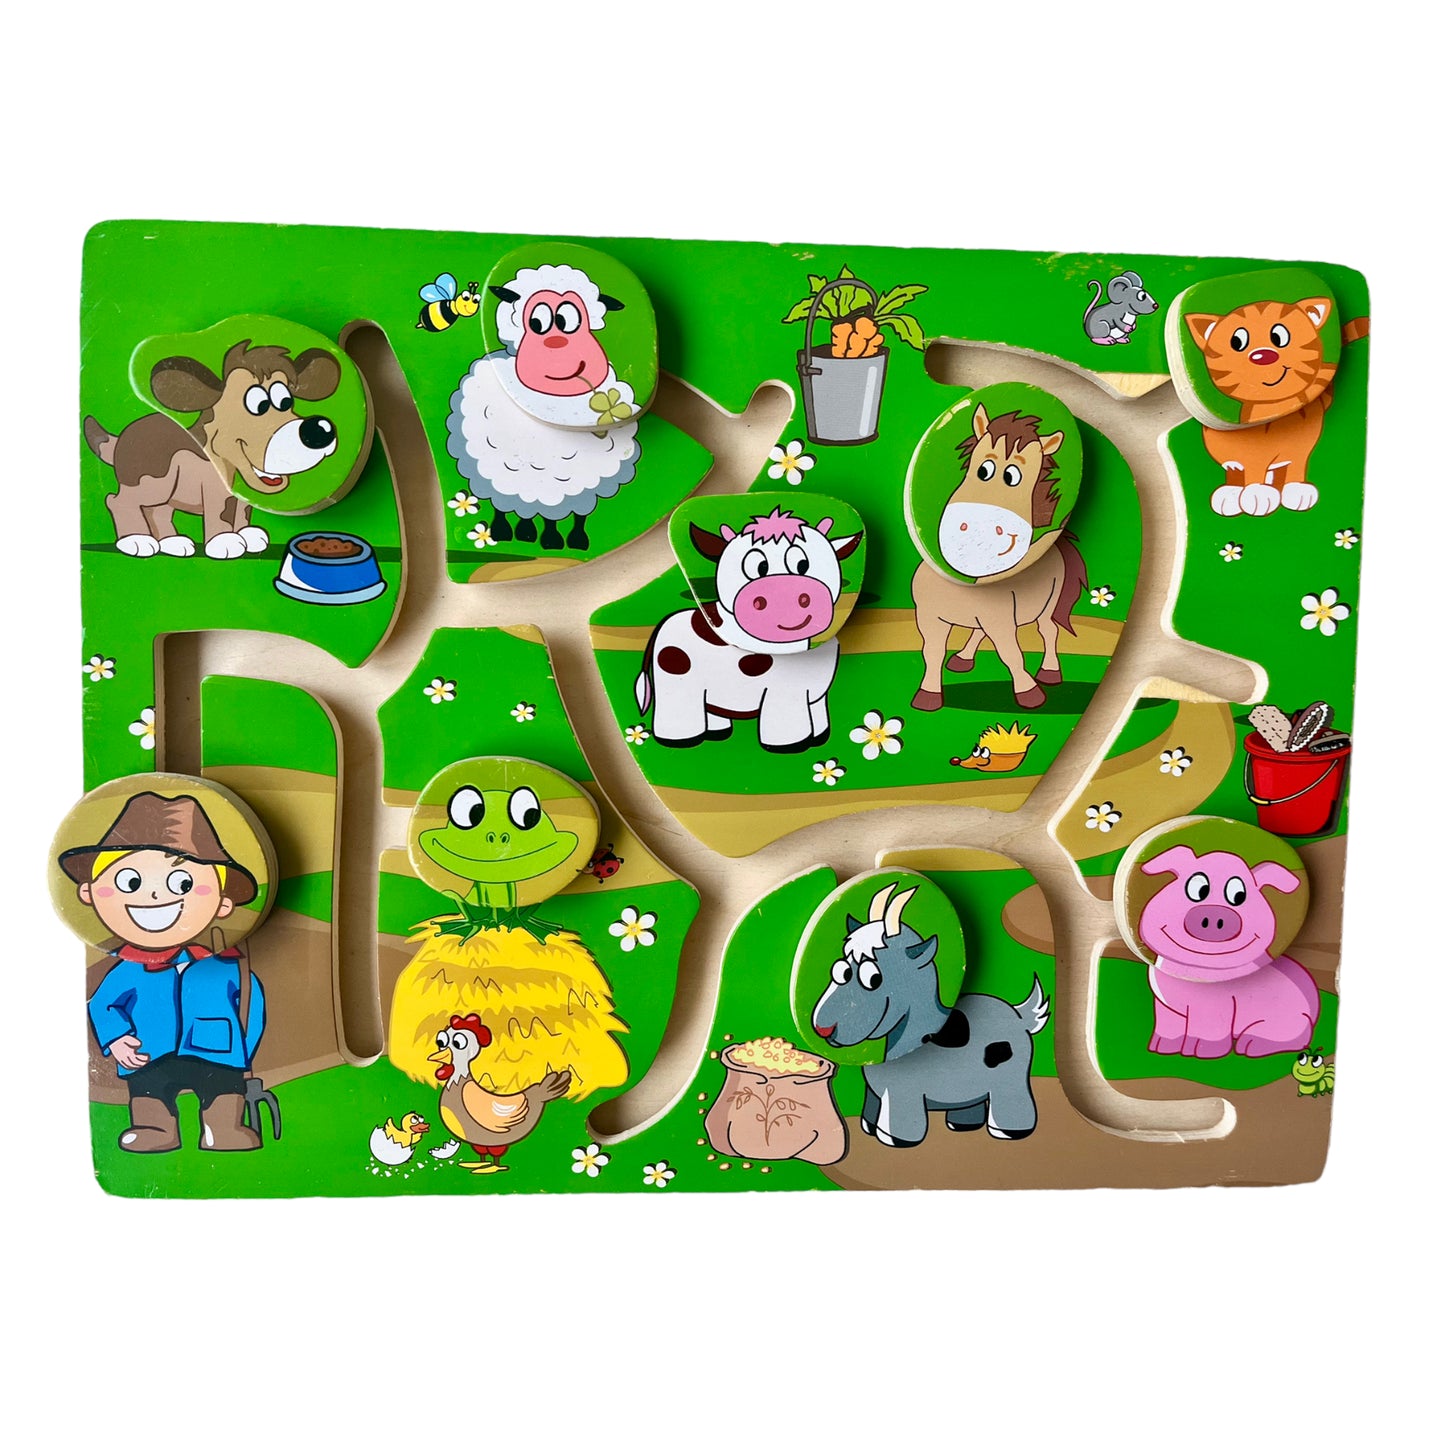 Wooden motor skills and coordination puzzle - The farm